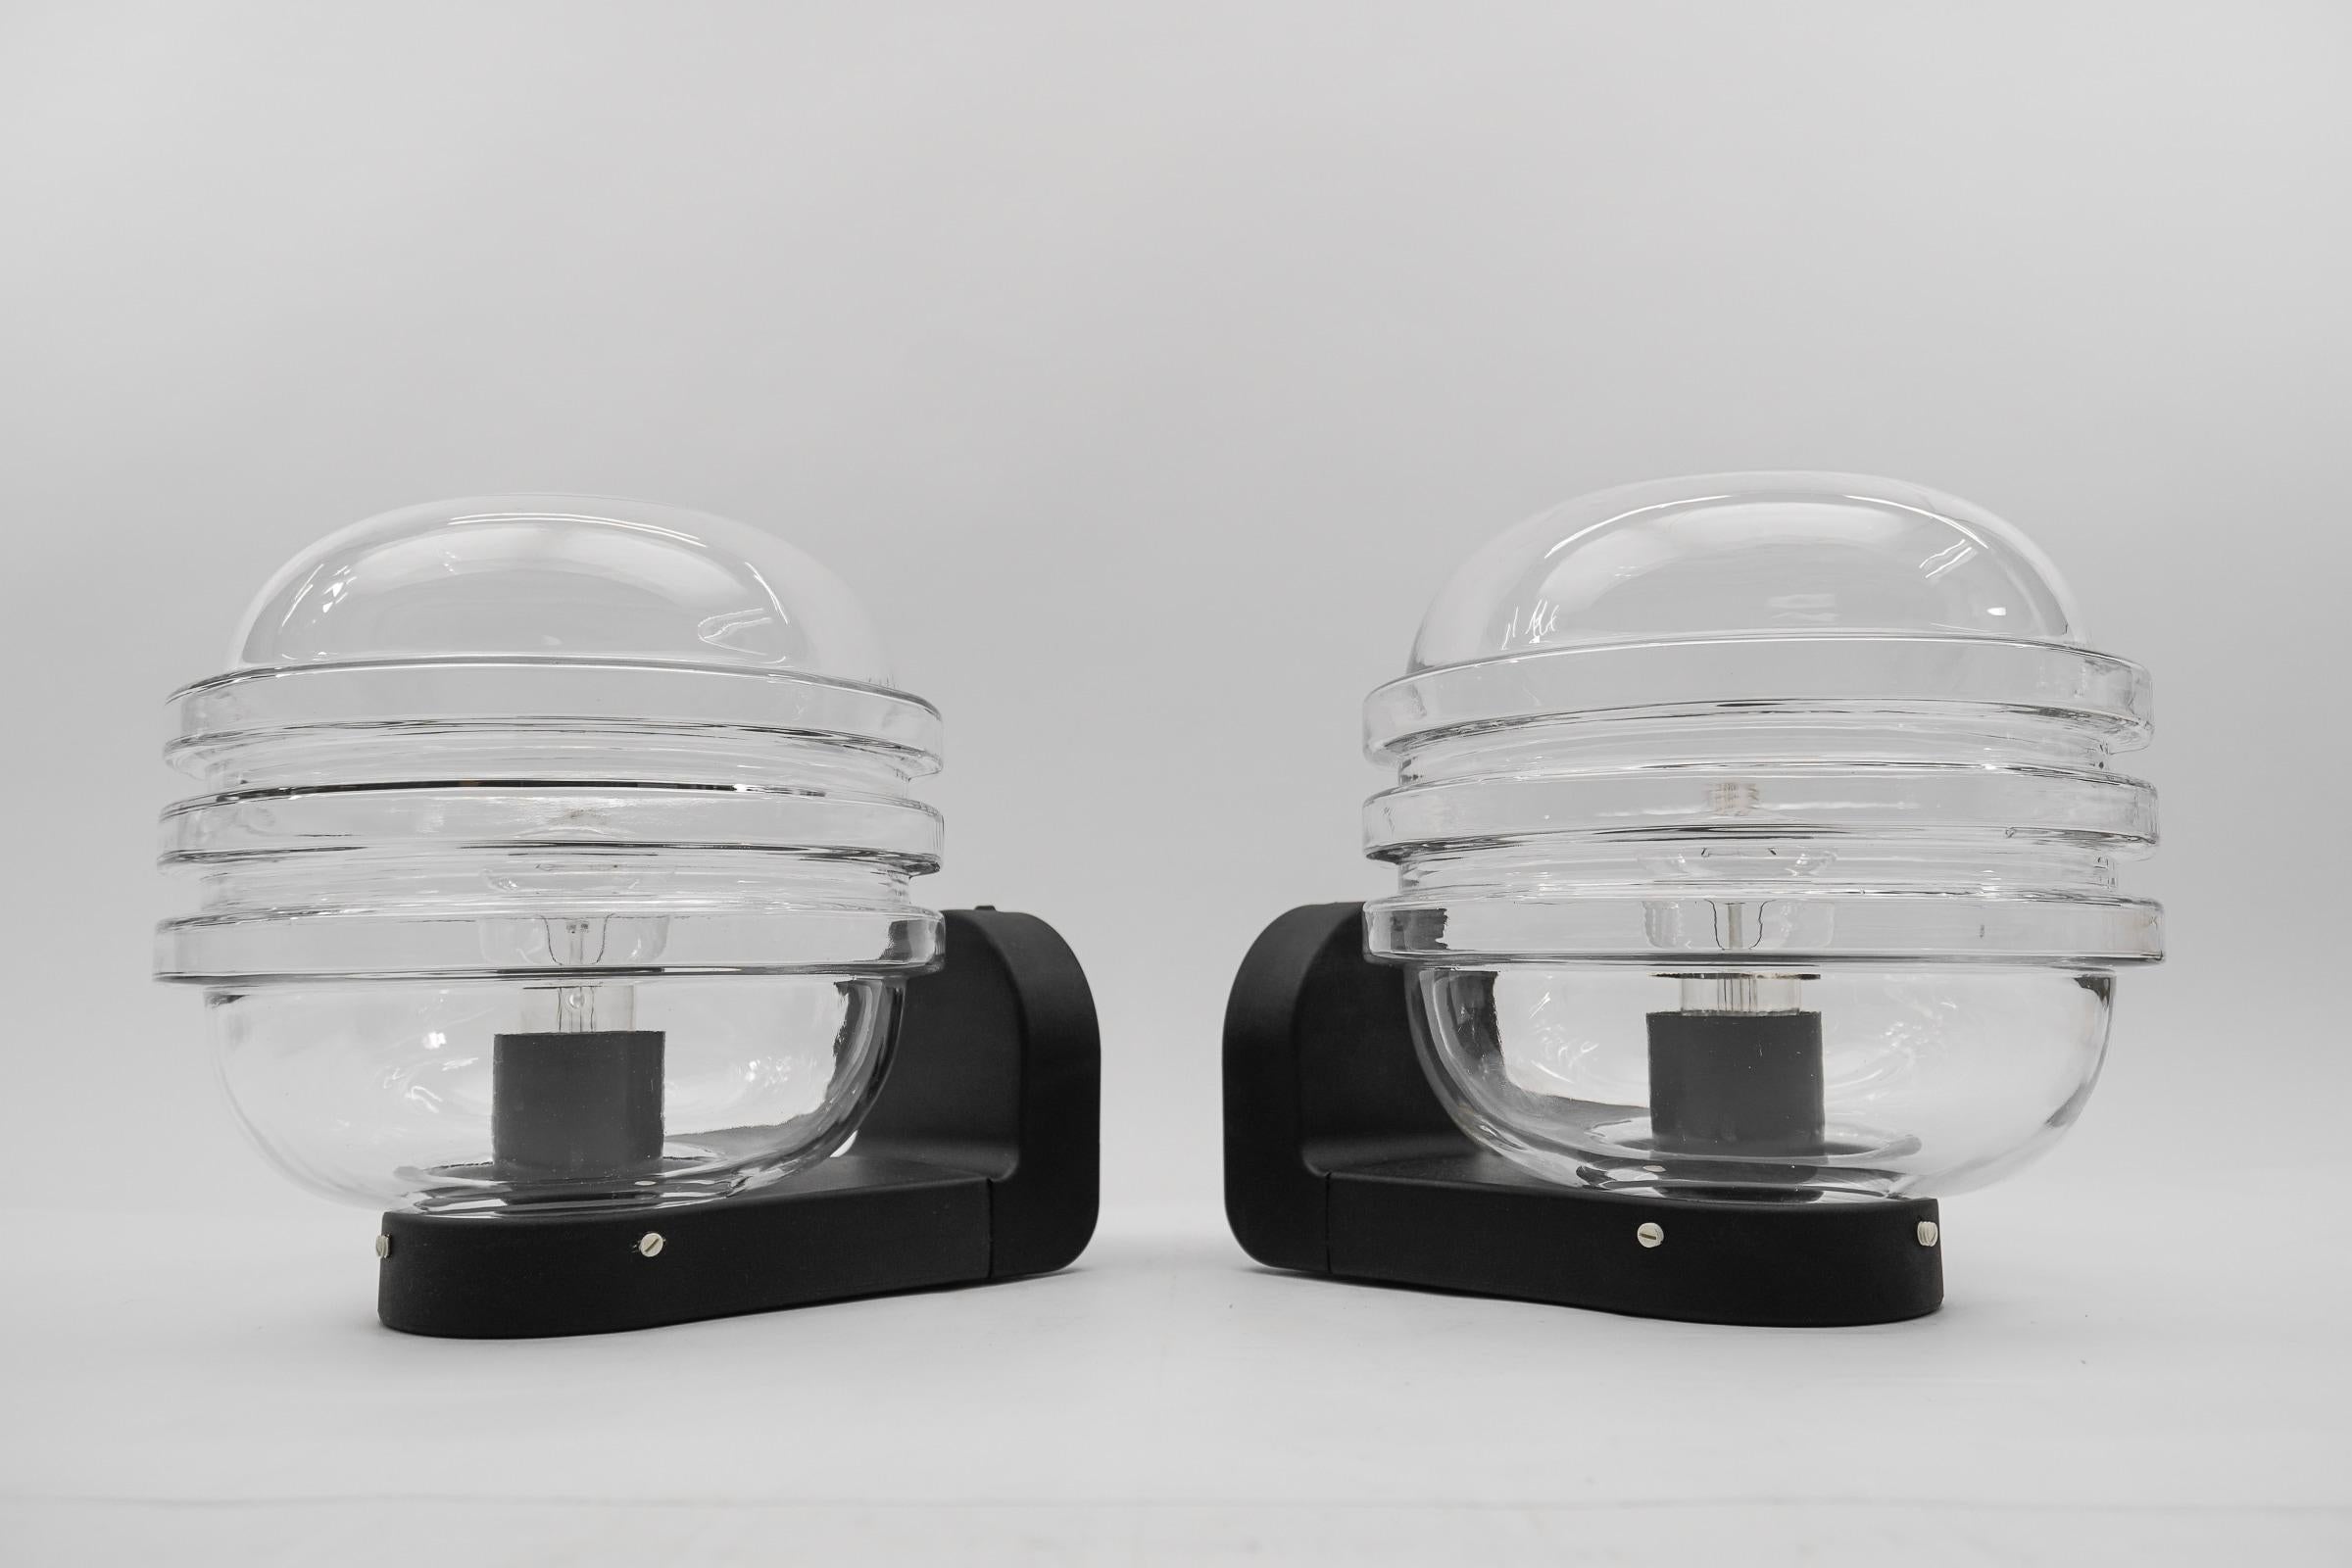 Pair of Space Age Outdoor Wall Lamps in Black and Clear Glass, 1970s For Sale 1